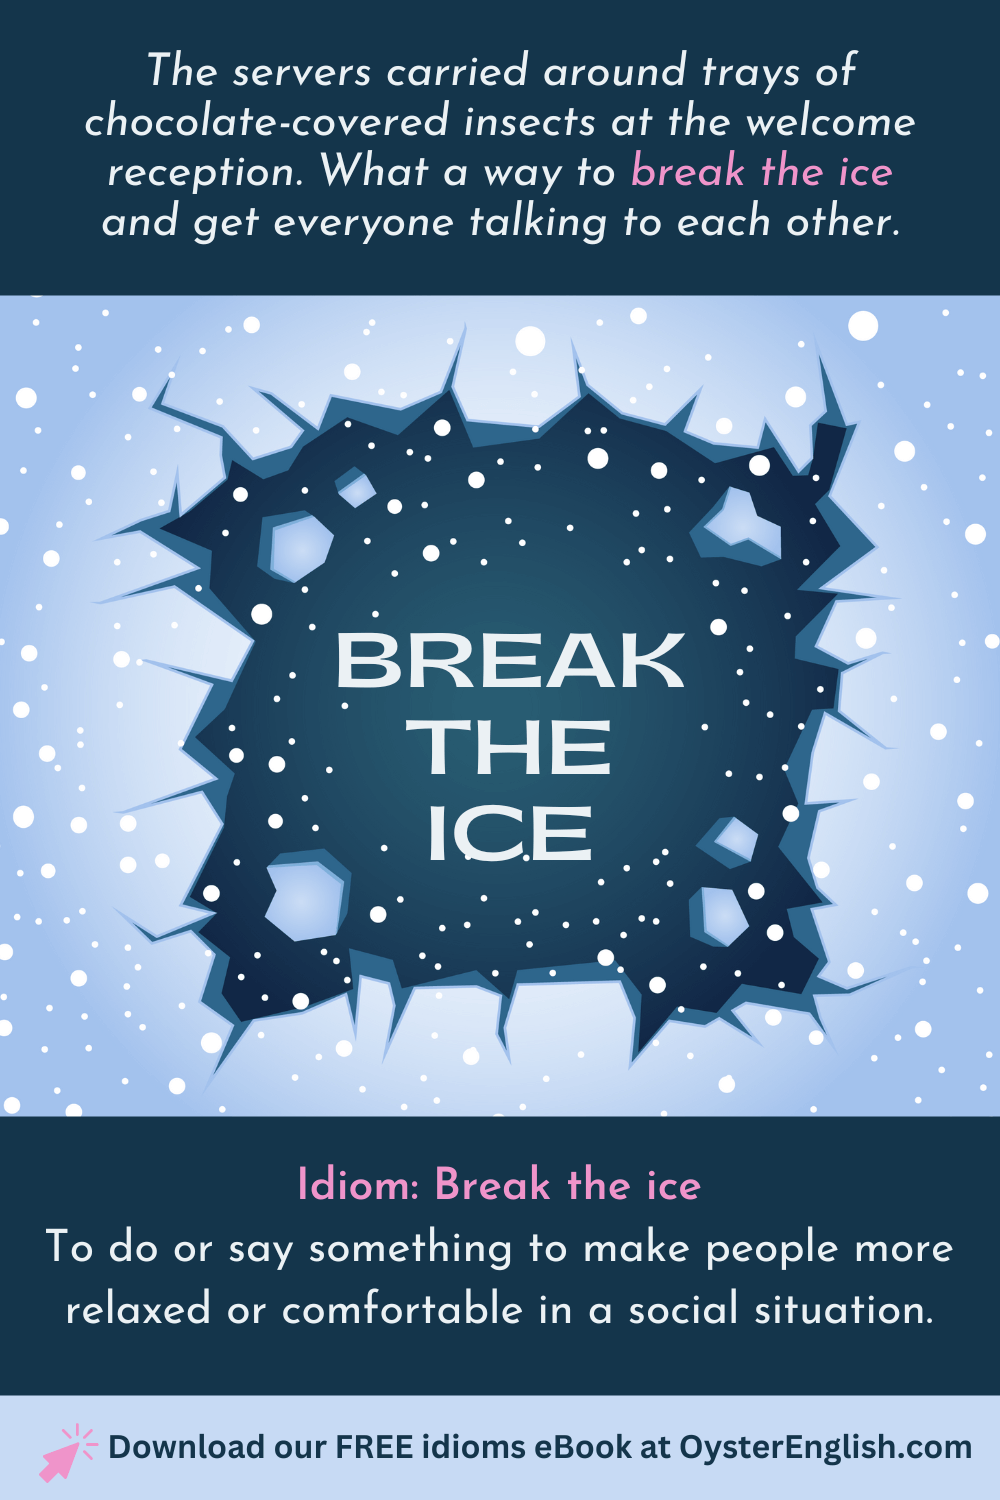 English with Karim - Break the ice =D If you break the ice at a party or  meeting, or in a new situation, you say or do something to make people feel